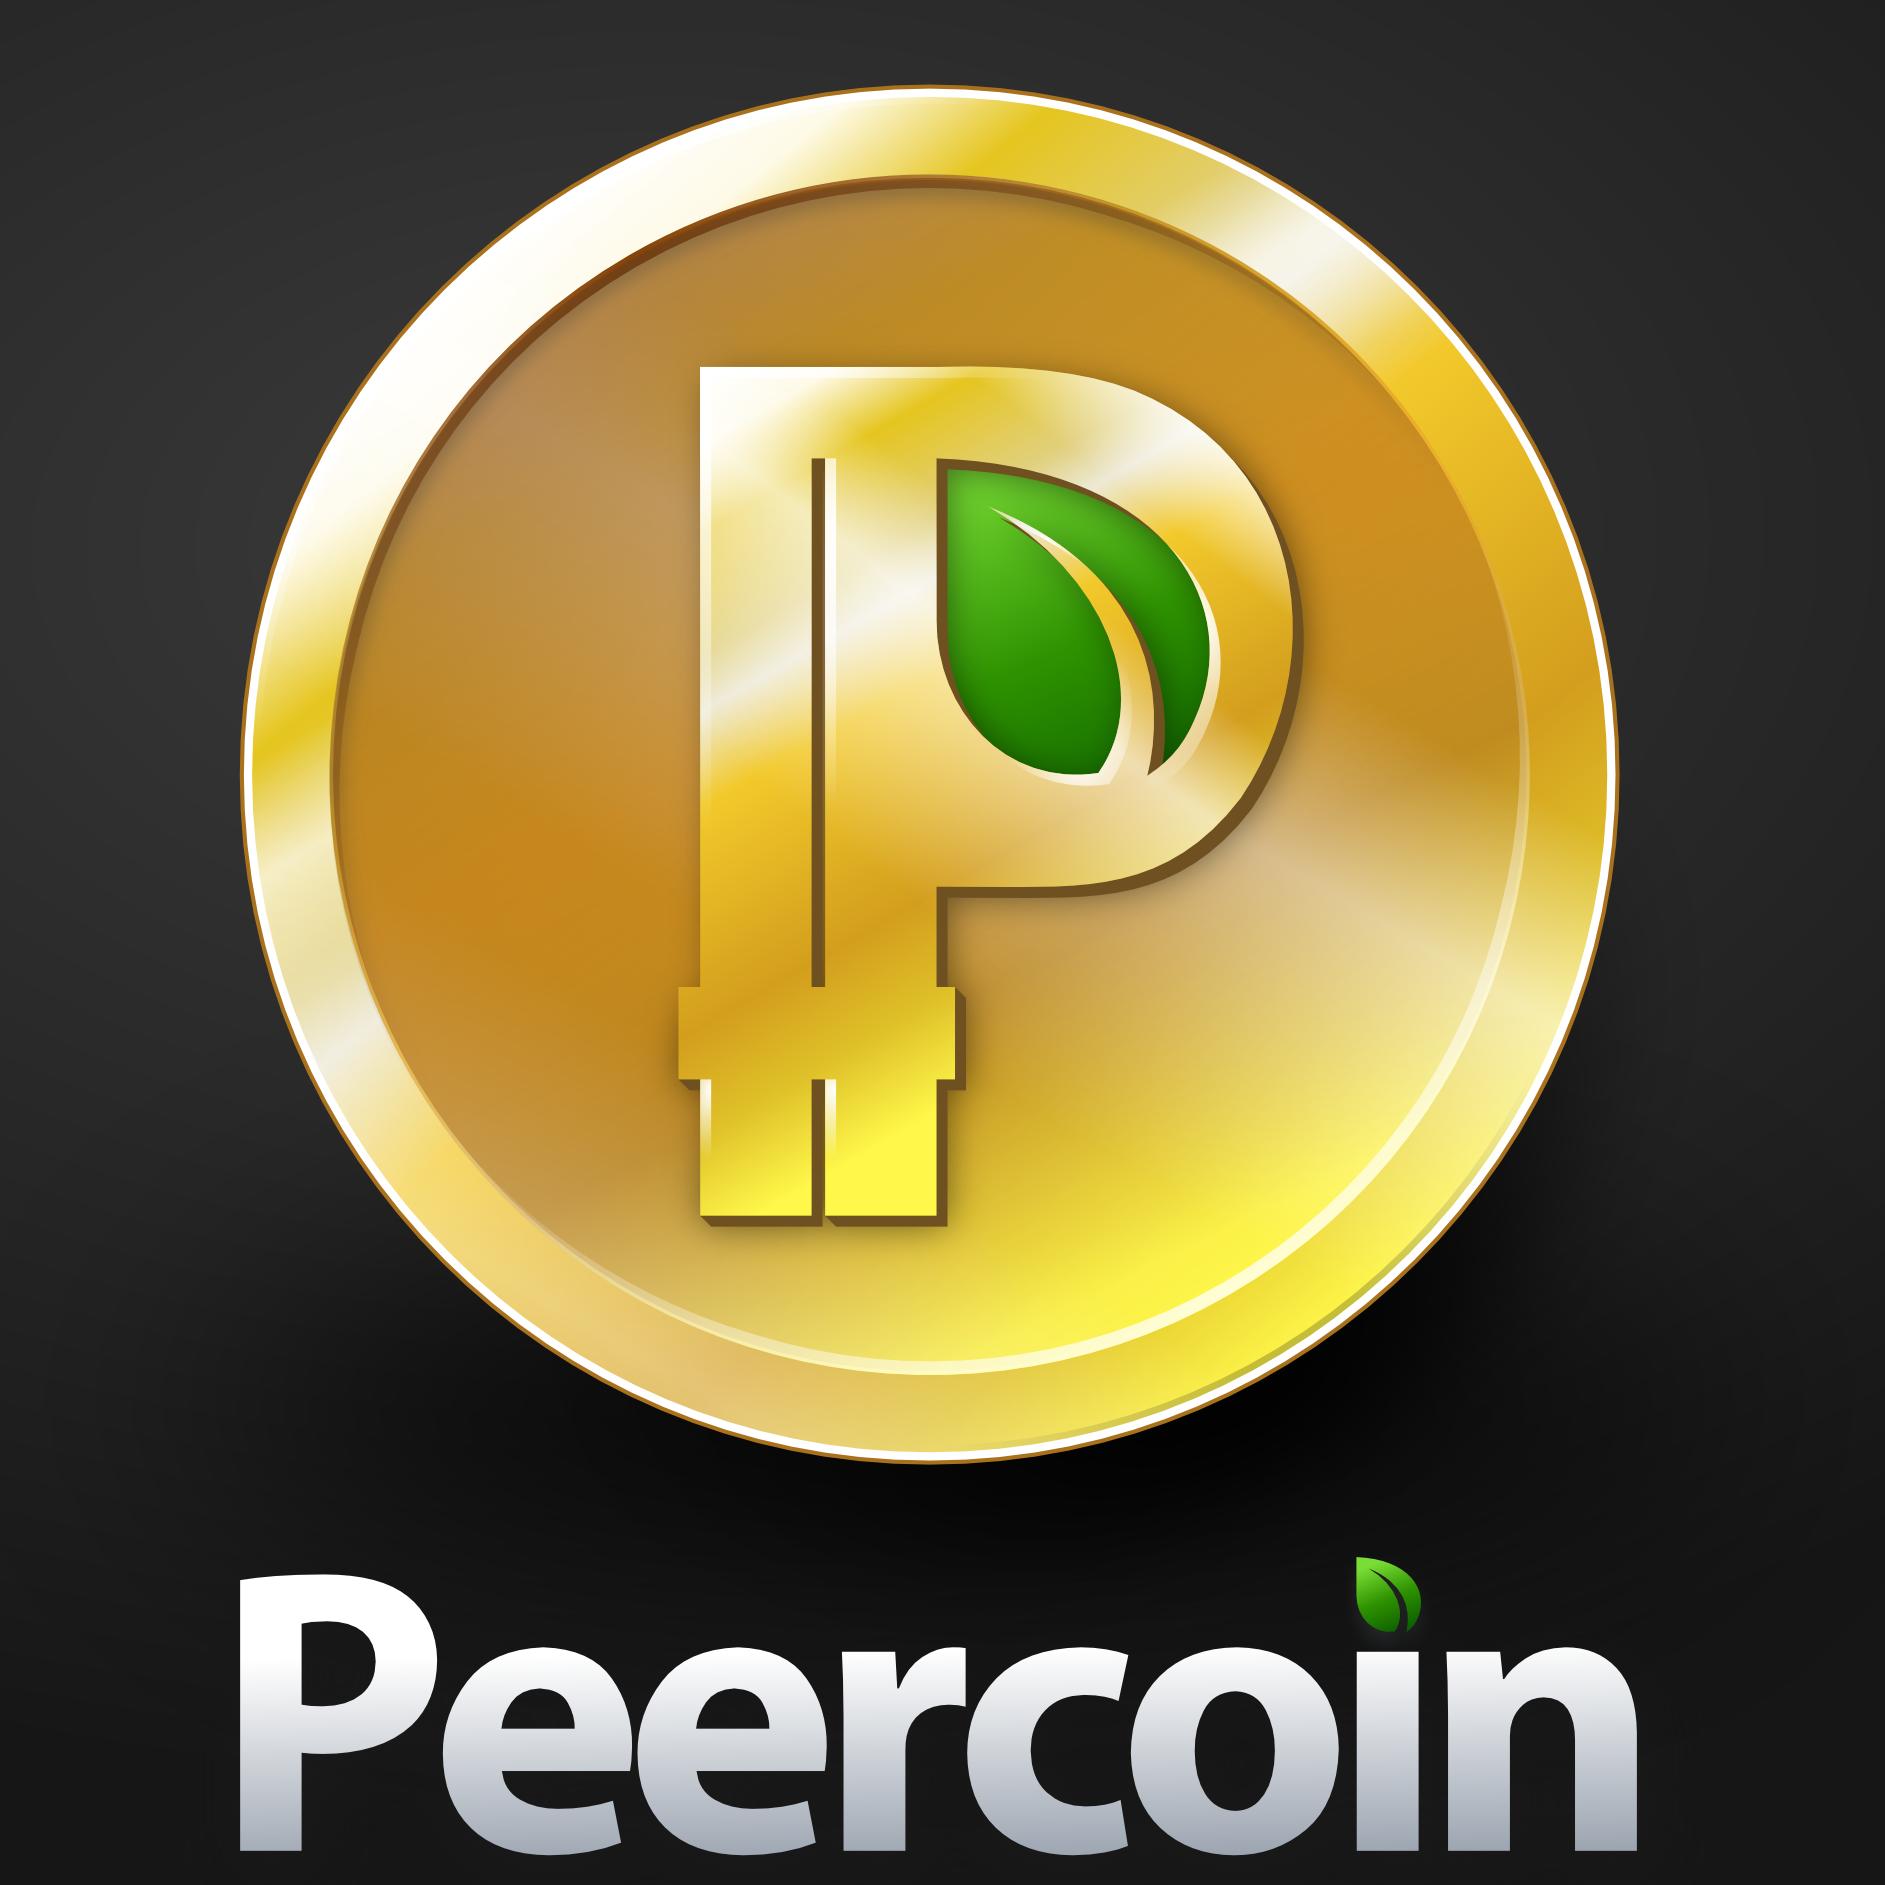 Peercoin (PPC) Logo .SVG and .PNG Files Download